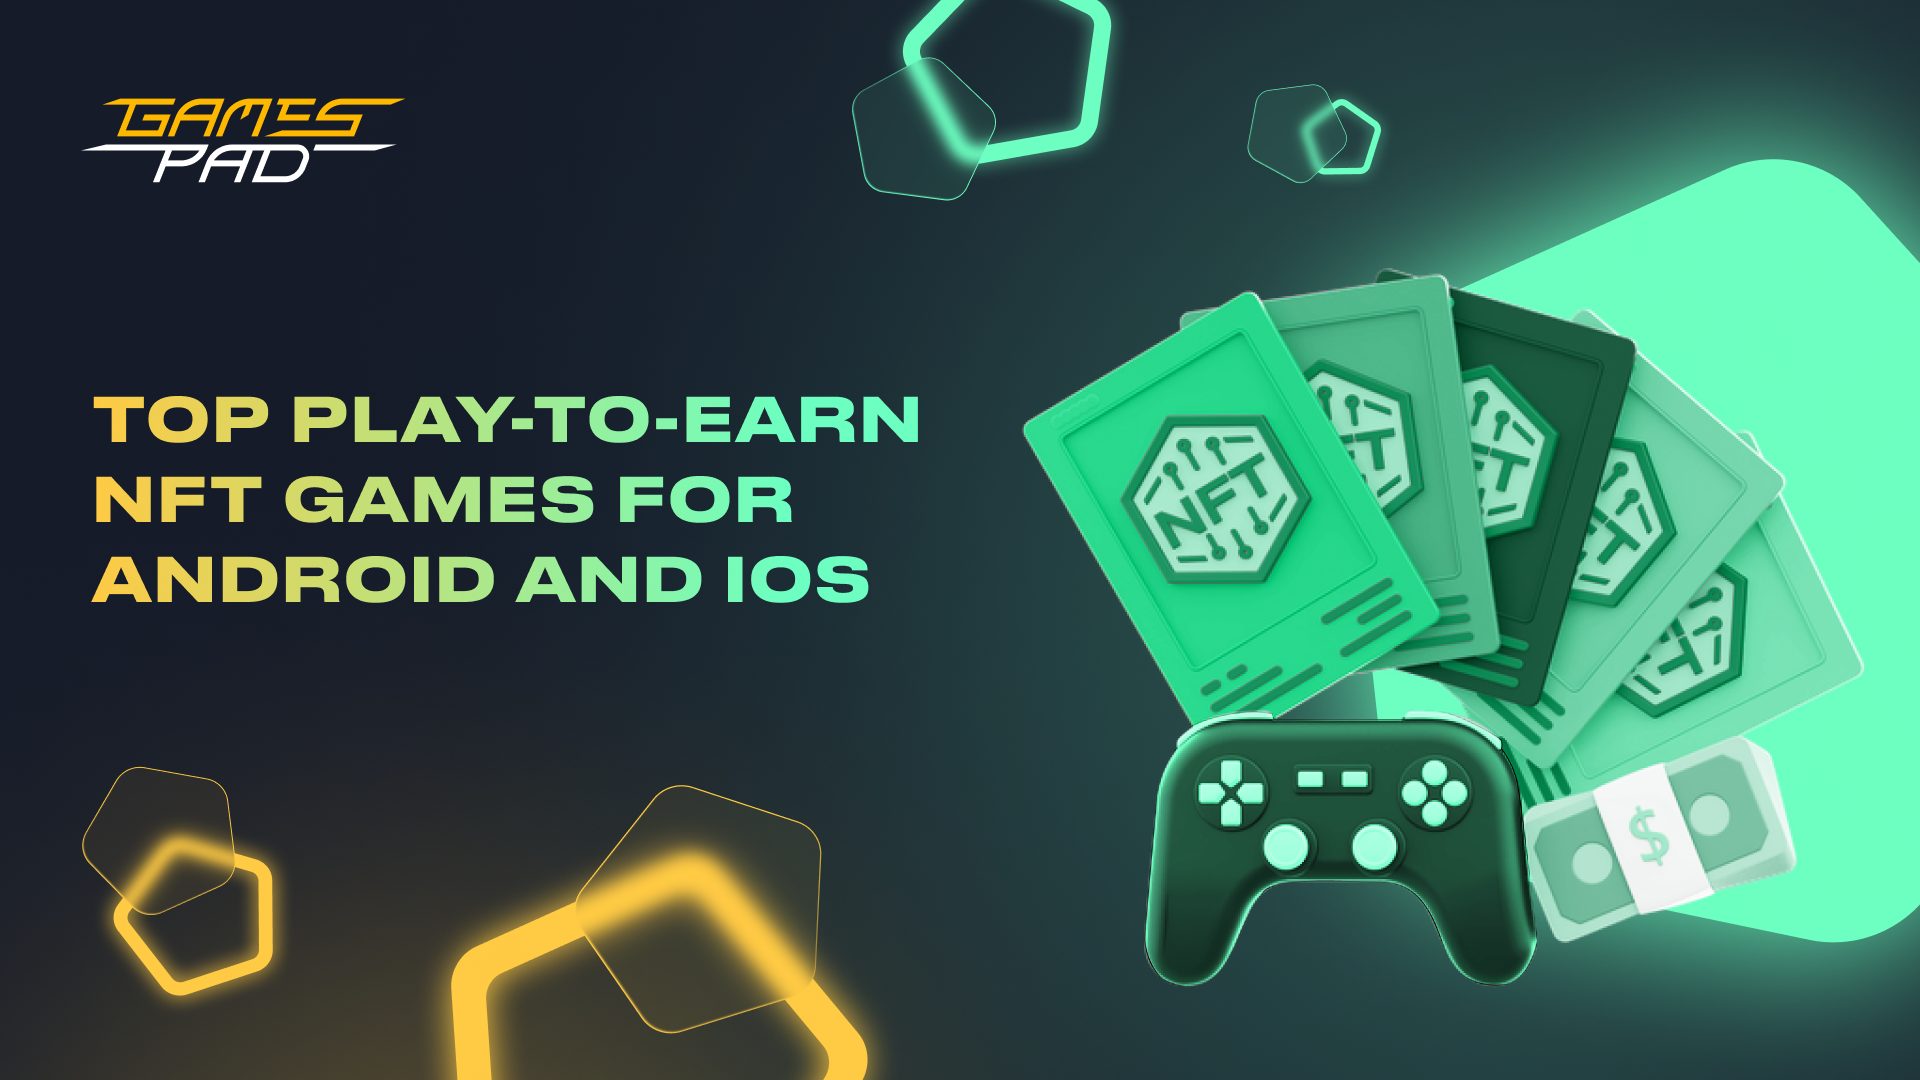 Top Play-to-Earn NFT Games For Android And iOS